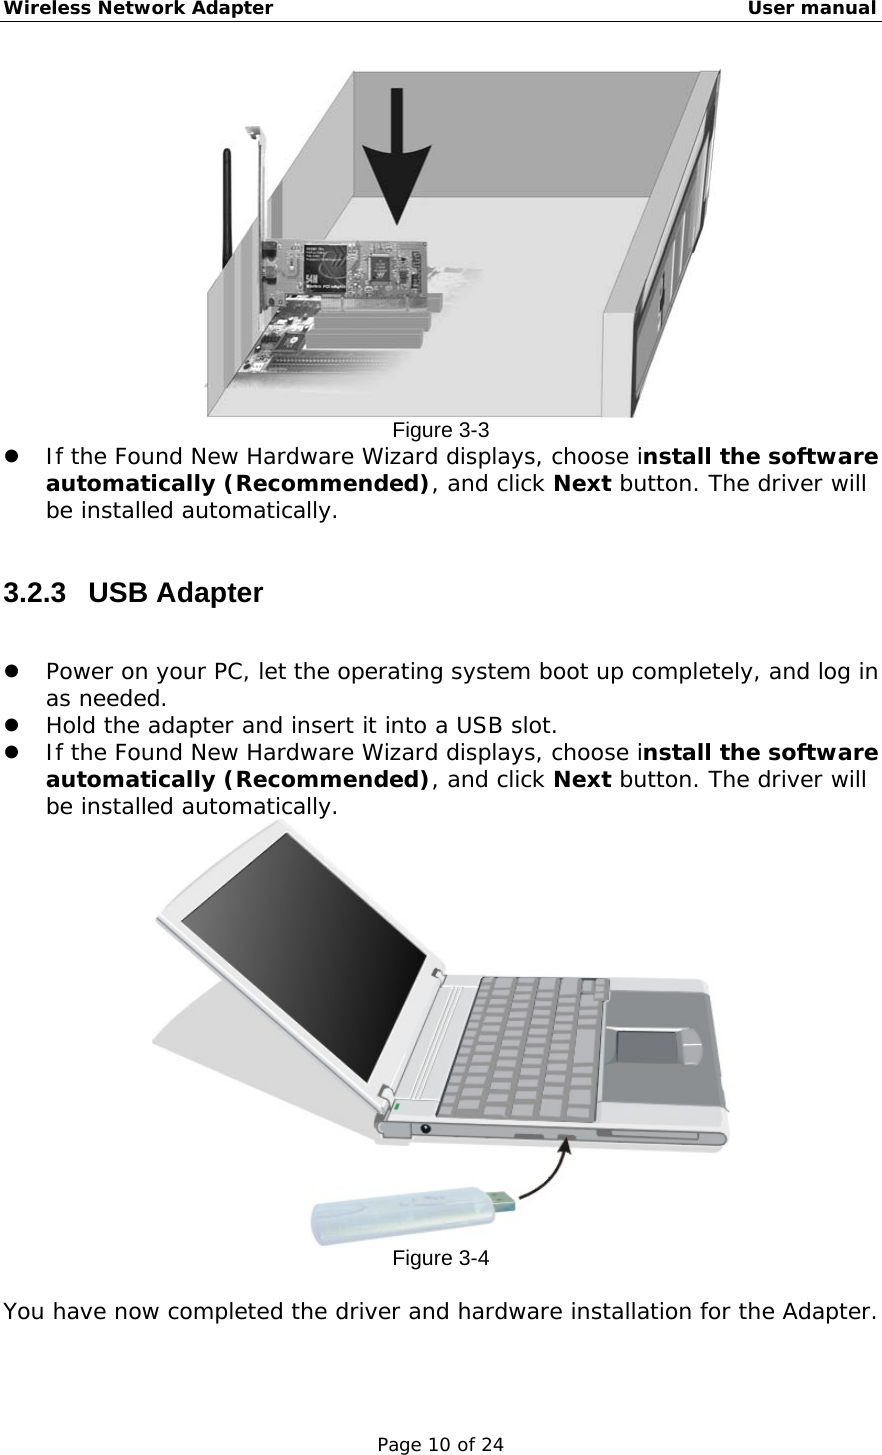 Wireless Network Adapter                                                    User manual Page 10 of 24  Figure 3-3   If the Found New Hardware Wizard displays, choose install the software automatically (Recommended), and click Next button. The driver will be installed automatically.   3.2.3 USB Adapter    Power on your PC, let the operating system boot up completely, and log in as needed.   Hold the adapter and insert it into a USB slot.    If the Found New Hardware Wizard displays, choose install the software automatically (Recommended), and click Next button. The driver will be installed automatically.  Figure 3-4  You have now completed the driver and hardware installation for the Adapter.  